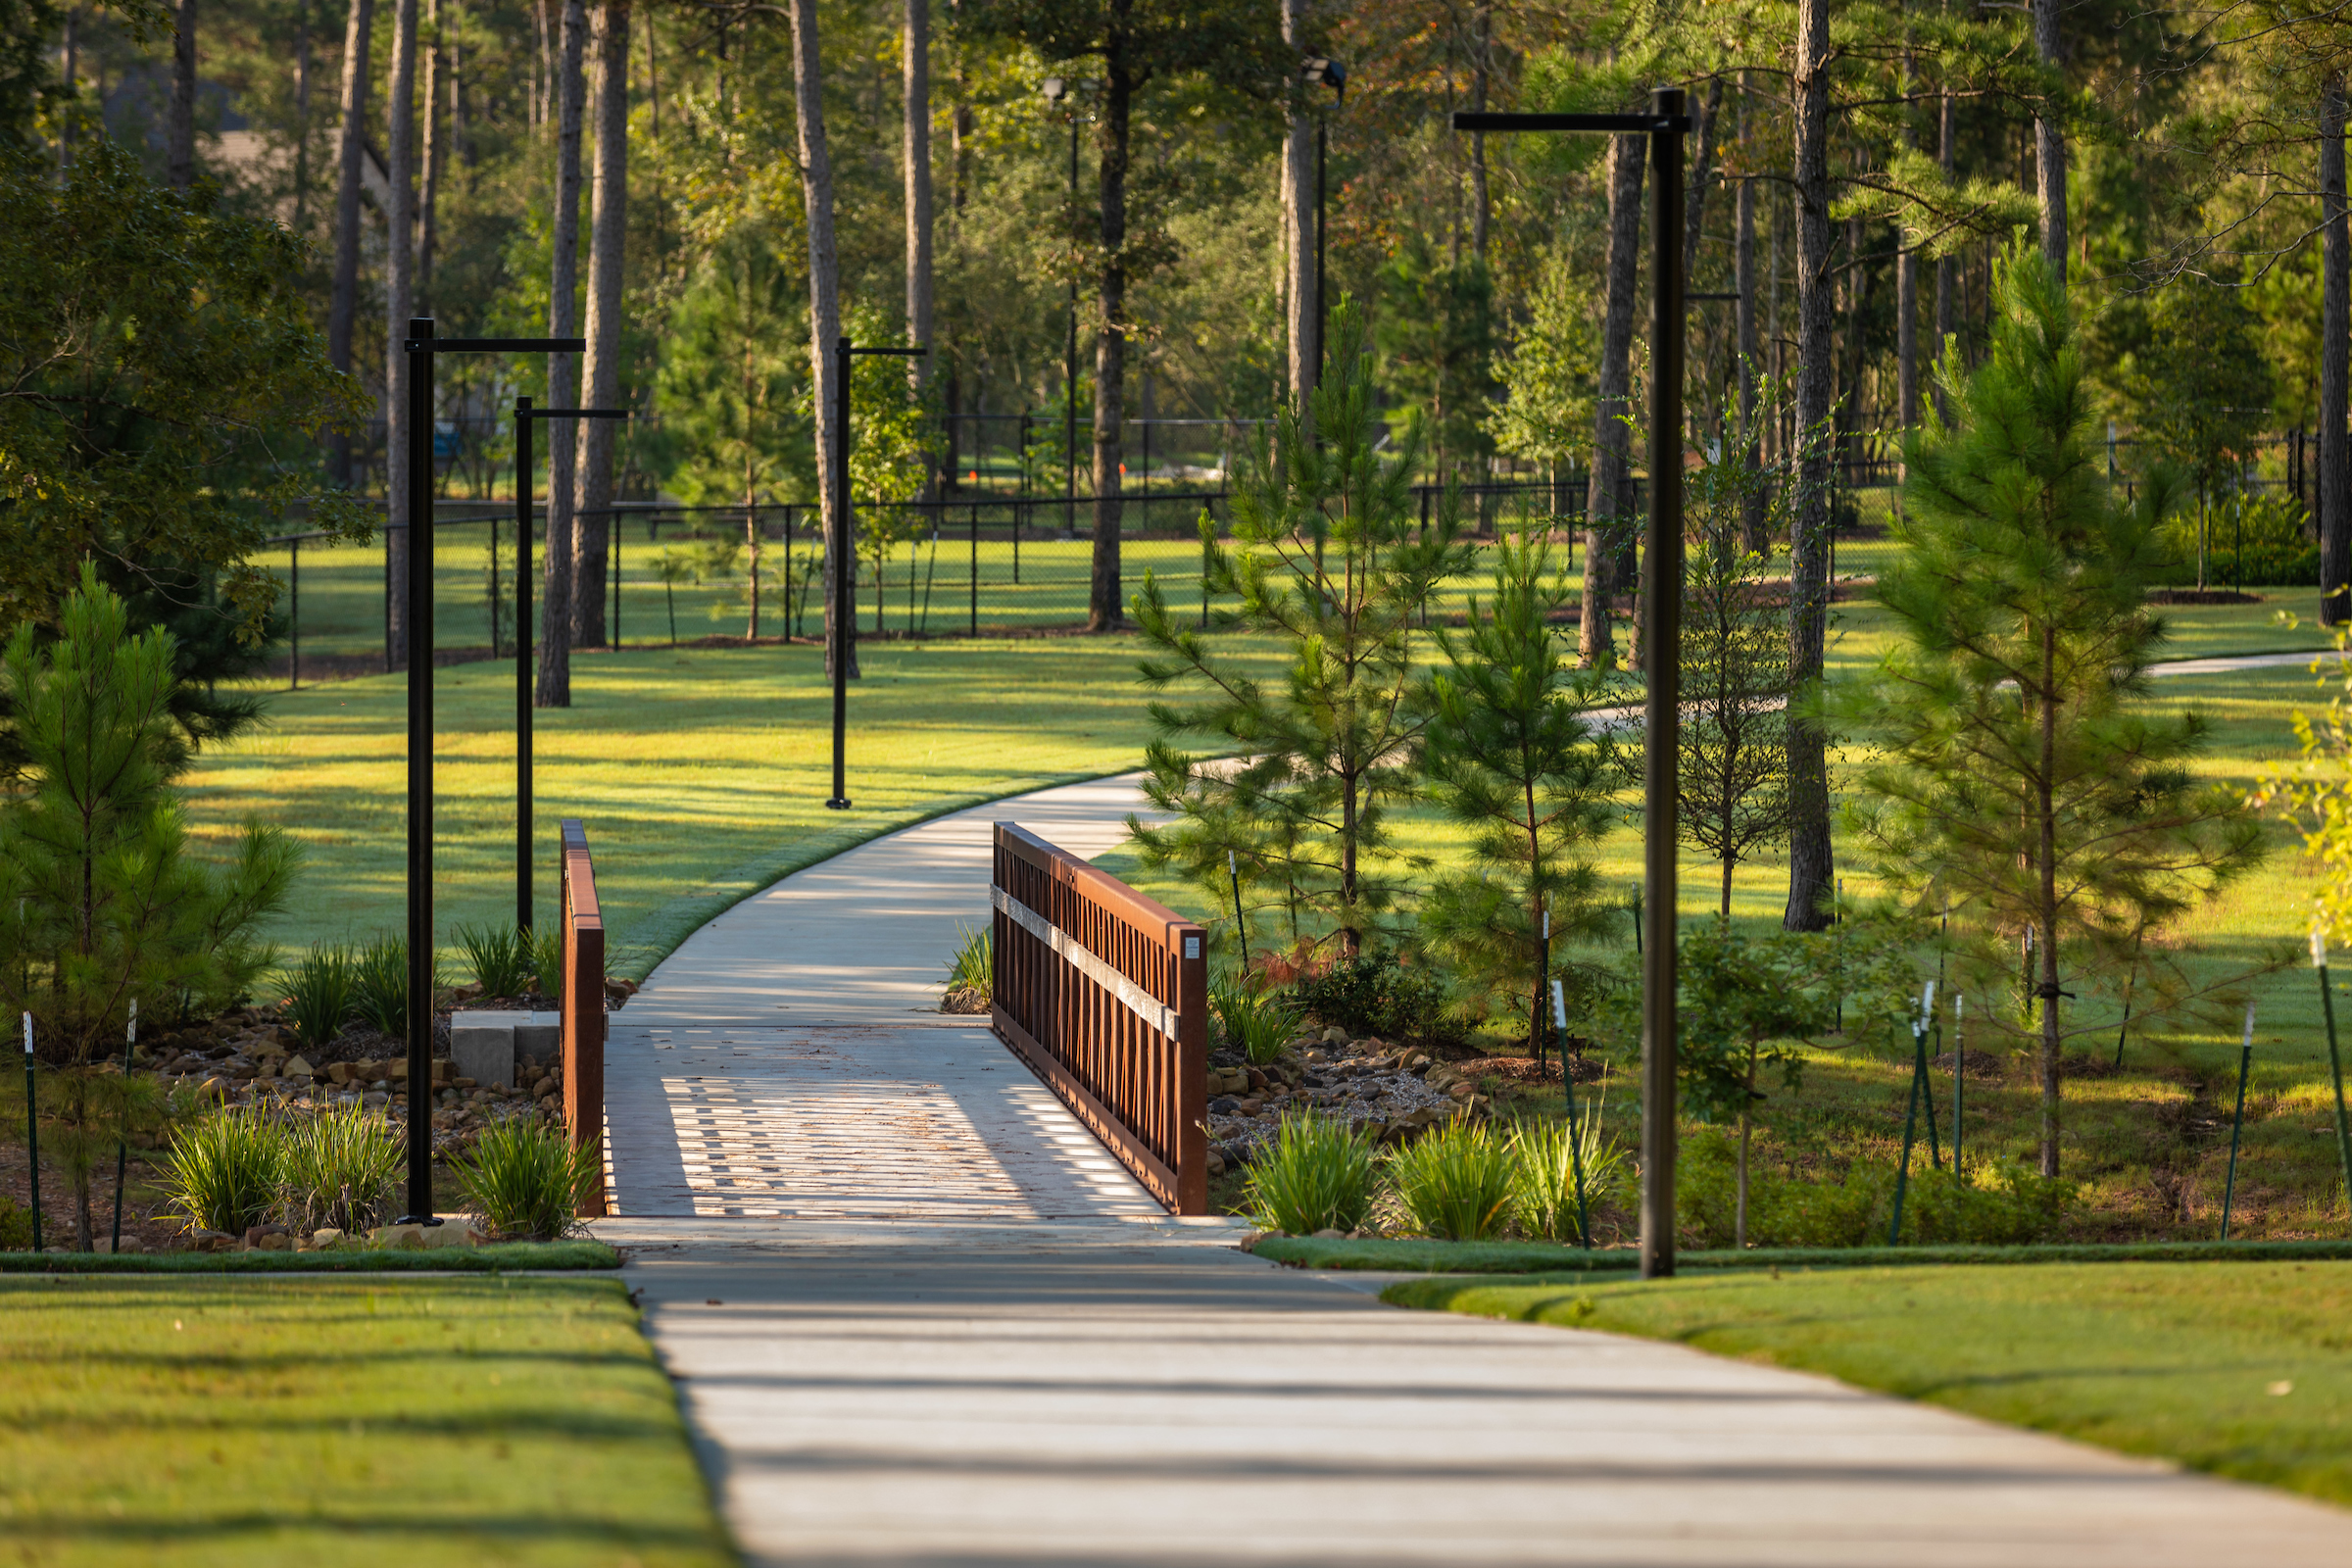 Expansive Outdoor Space at The Woodlands Hills Provides Opportunity to Connect with Nature